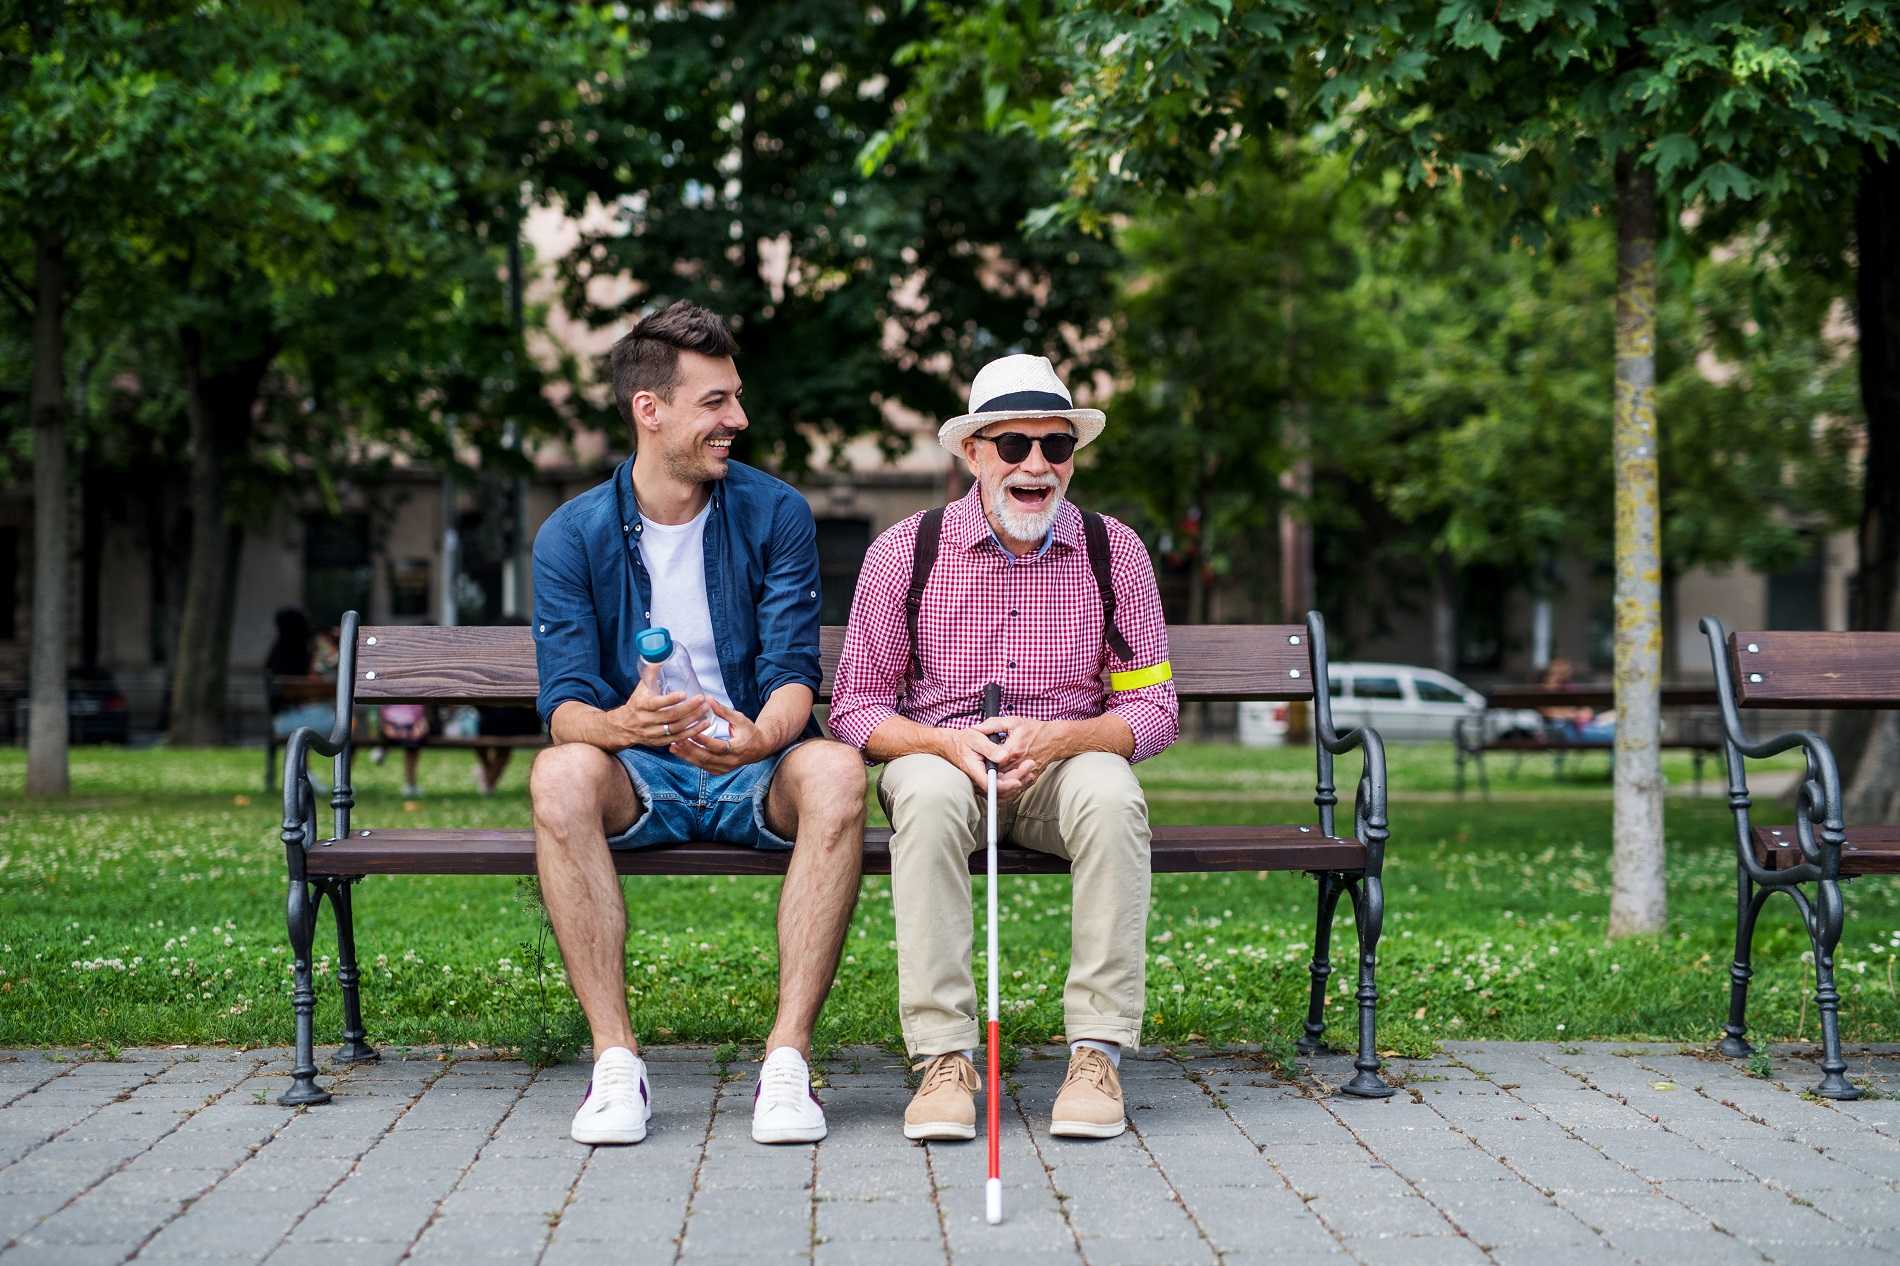 Two men sitting and talking on a bench, younger man on left wearing blue shirt older man sitting on right wearing a fedora and holding a white cane